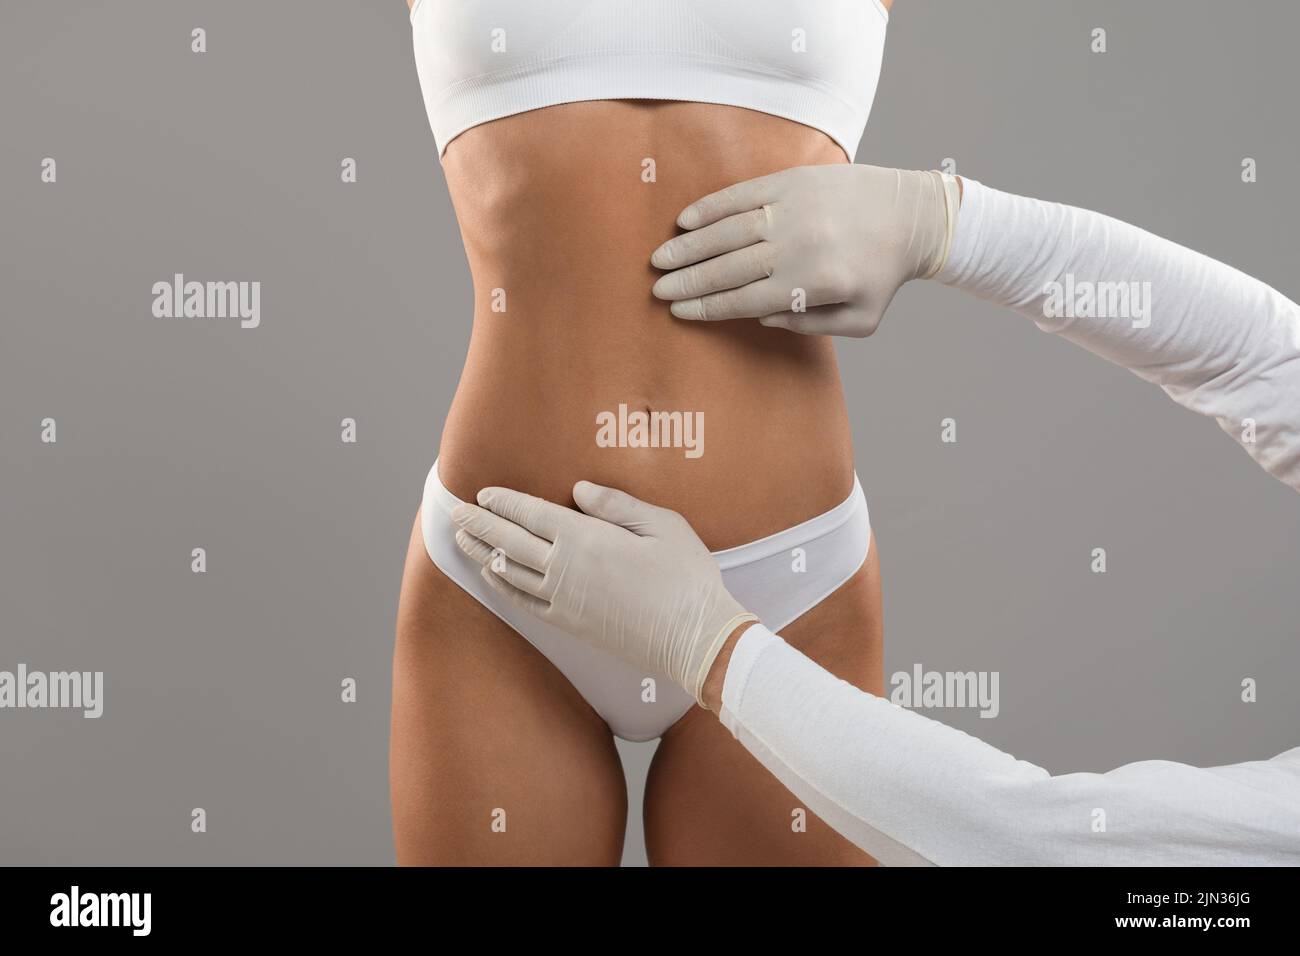 Body Sculpting Concept. Unrecognizable Young Female Getting Consultation At Plastic Surgery Clinic Stock Photo